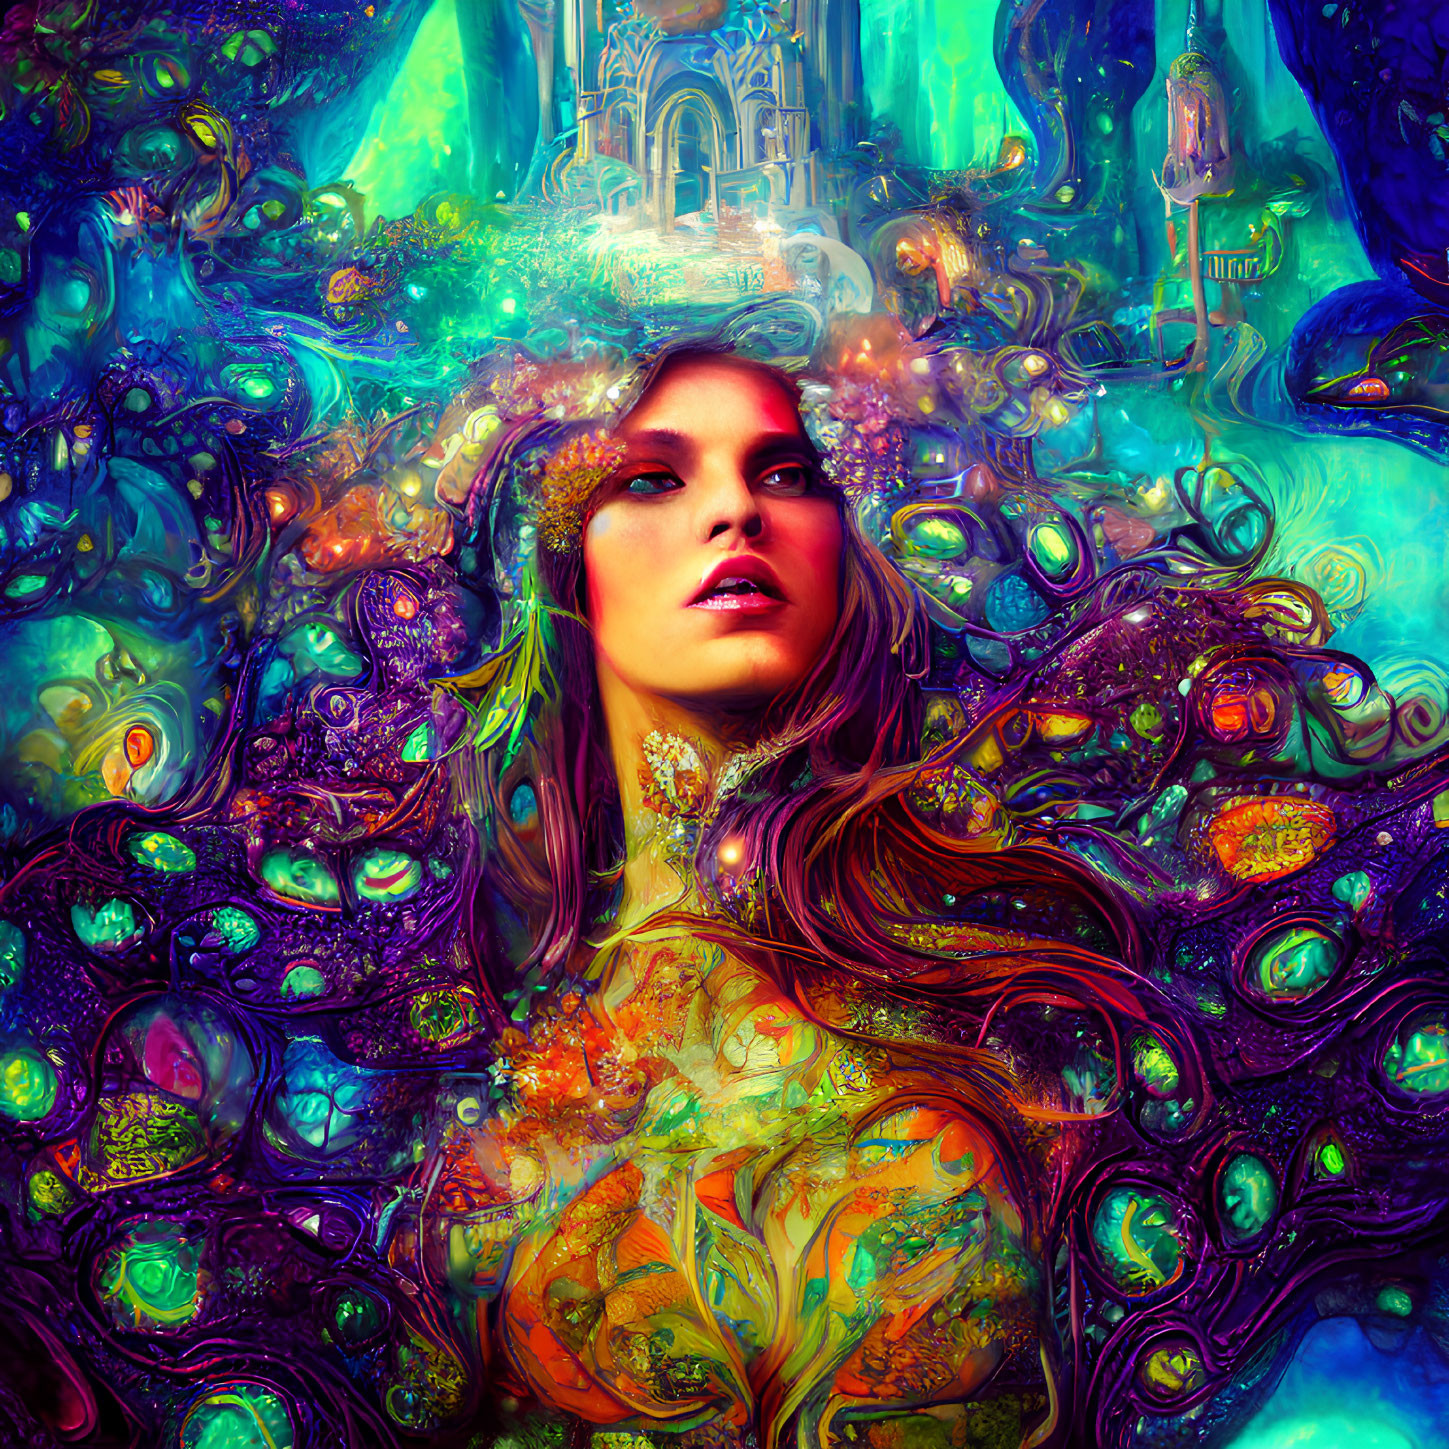 Colorful digital artwork: Woman with flowing hair in whimsical castle scene